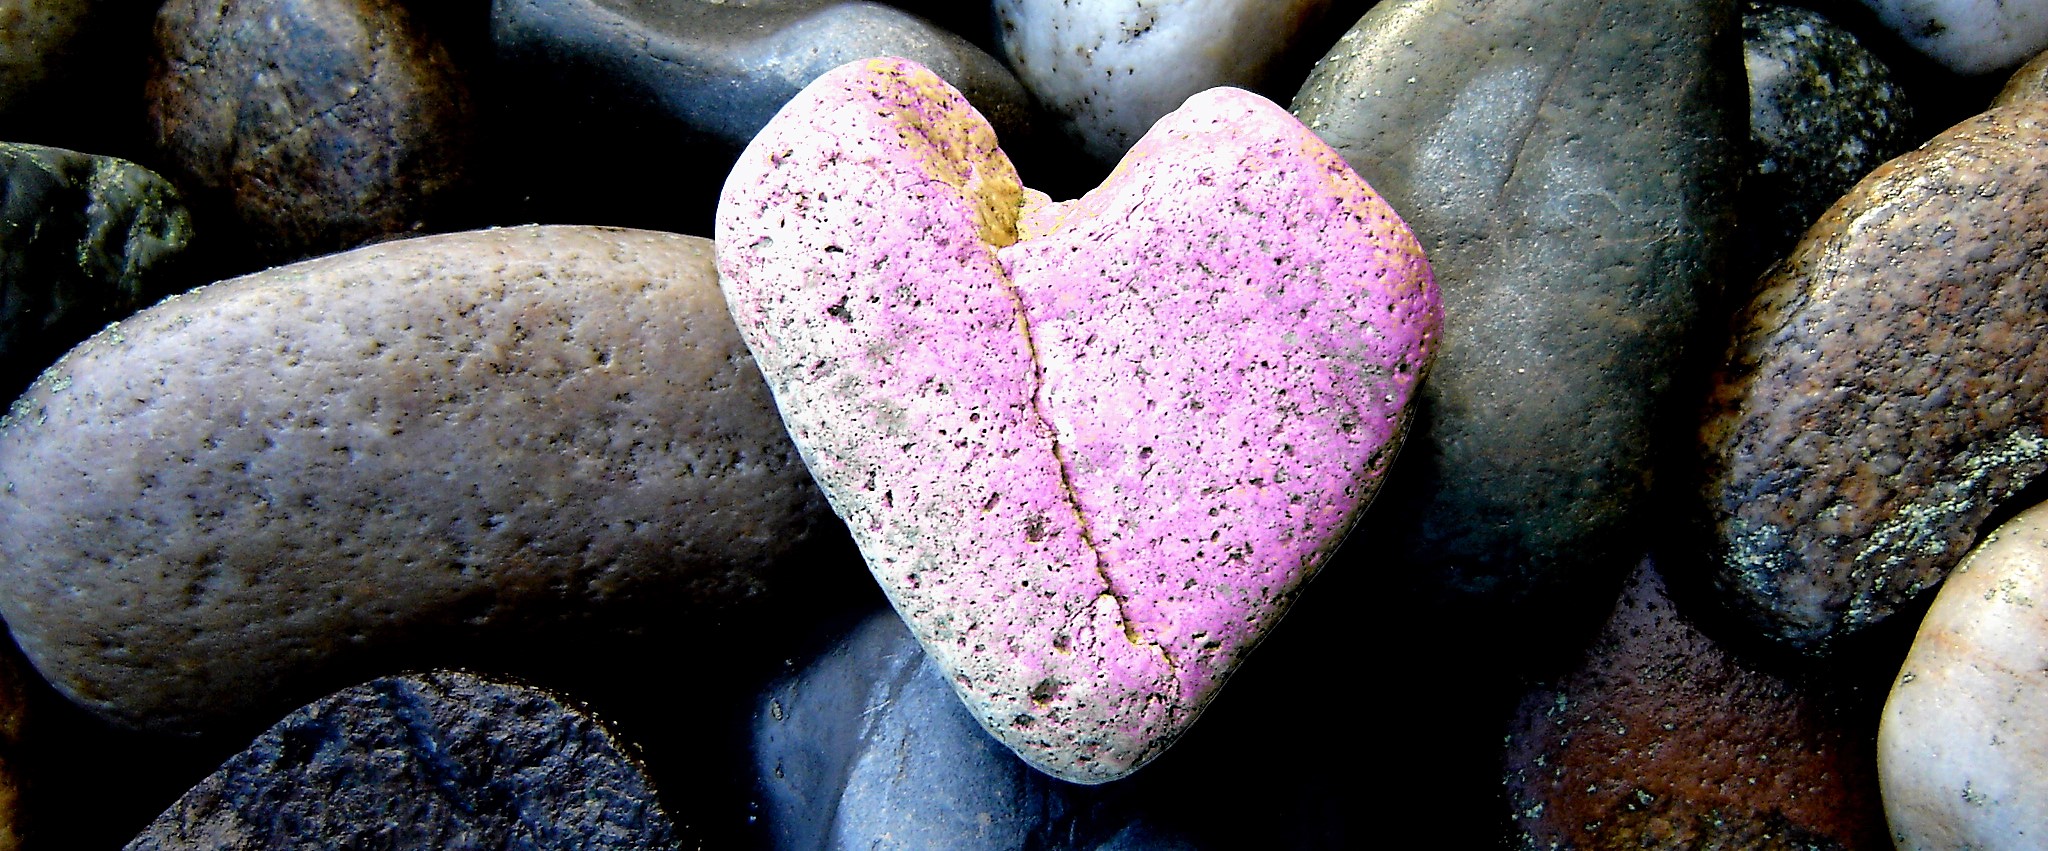 pink-heart-of-stone-1316358b